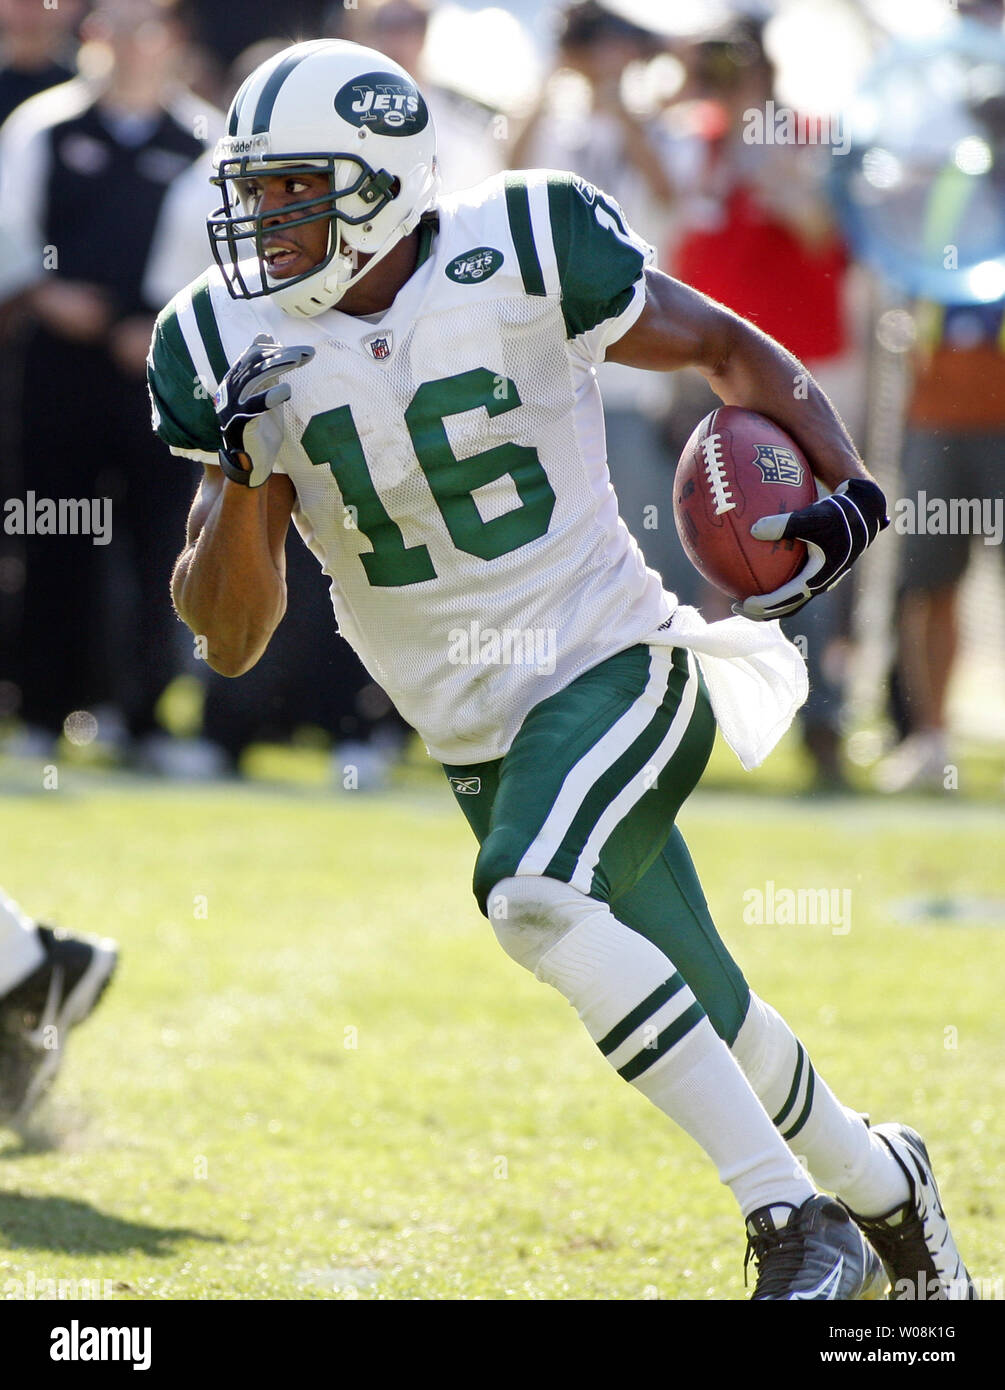 New York Jets WR Brad Smith turns the corner on an end around against the Oakland Raiders at the Oakland Coliseum in Oakland, California on October 19, 2008. The Raiders won 16-13 in overtime.  (UPI Photo/Terry Schmitt) Stock Photo